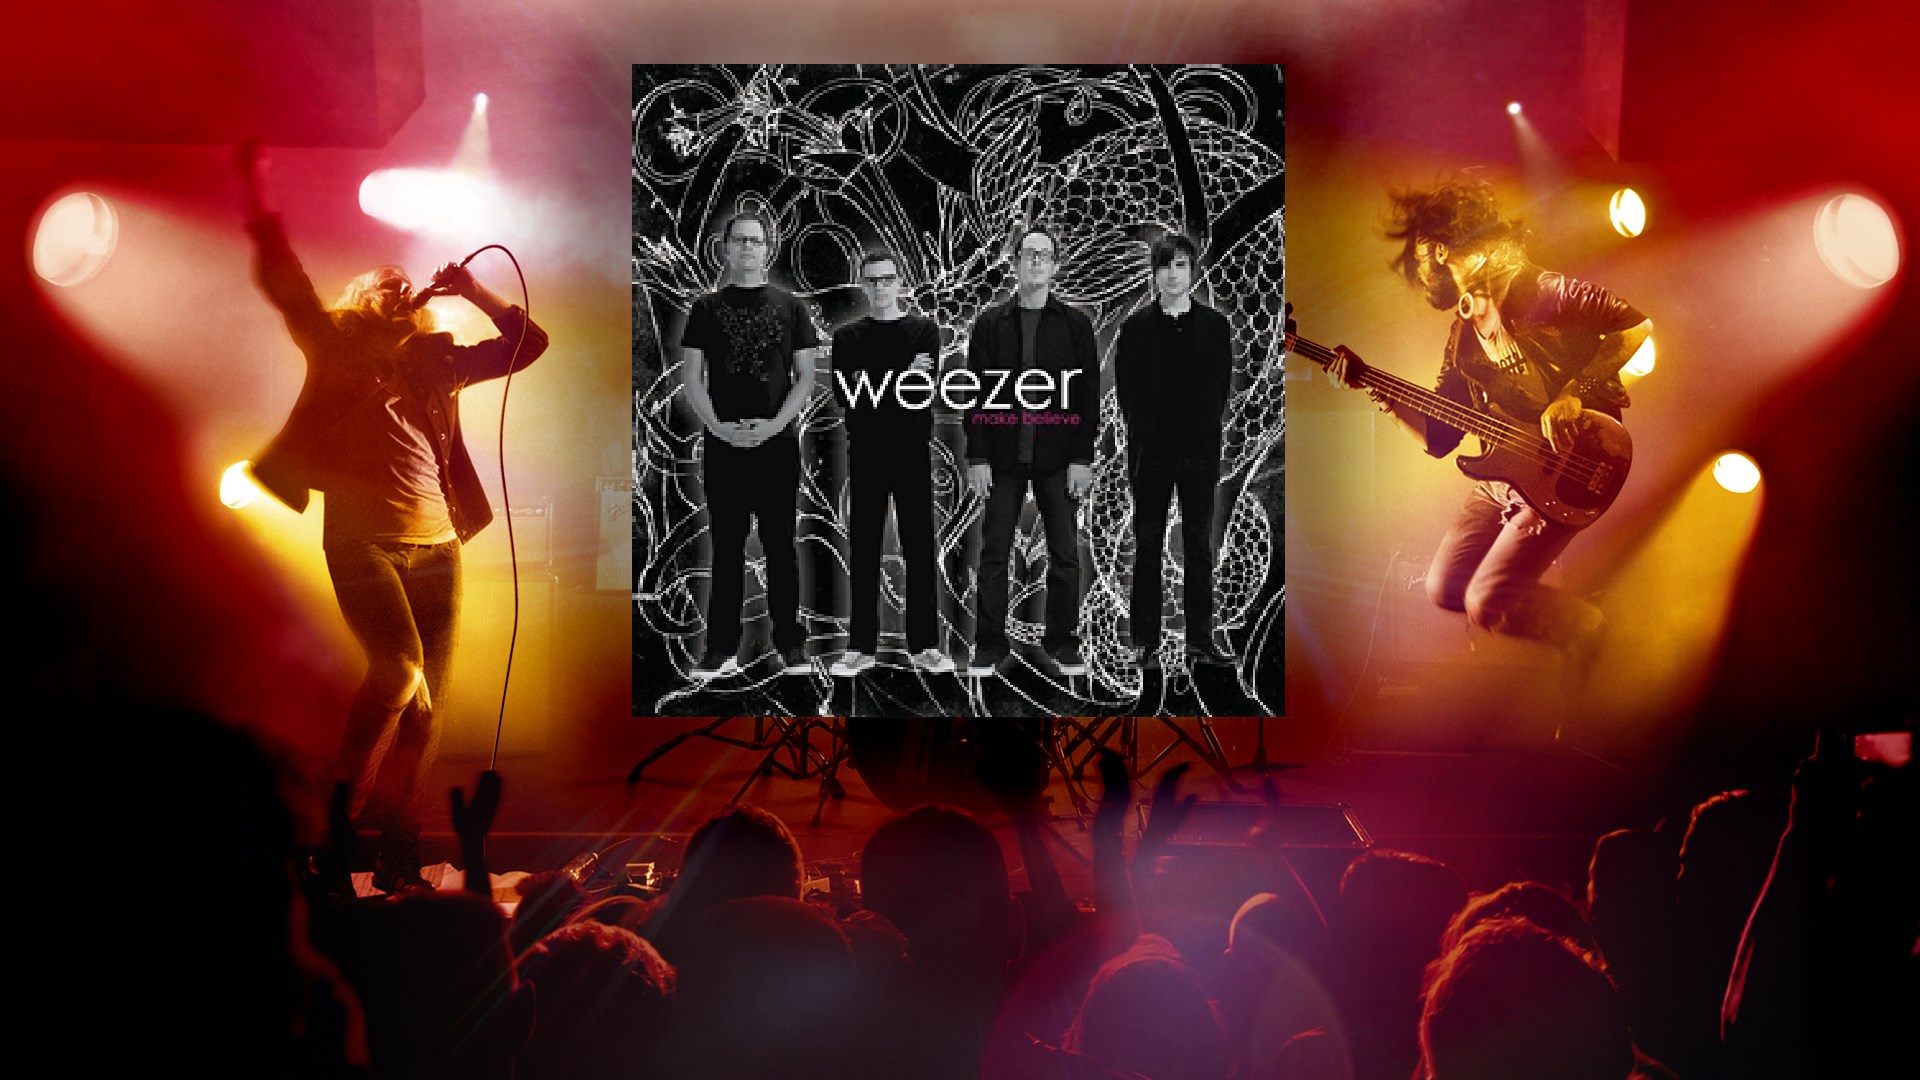 weezer perfect situation mp3 download